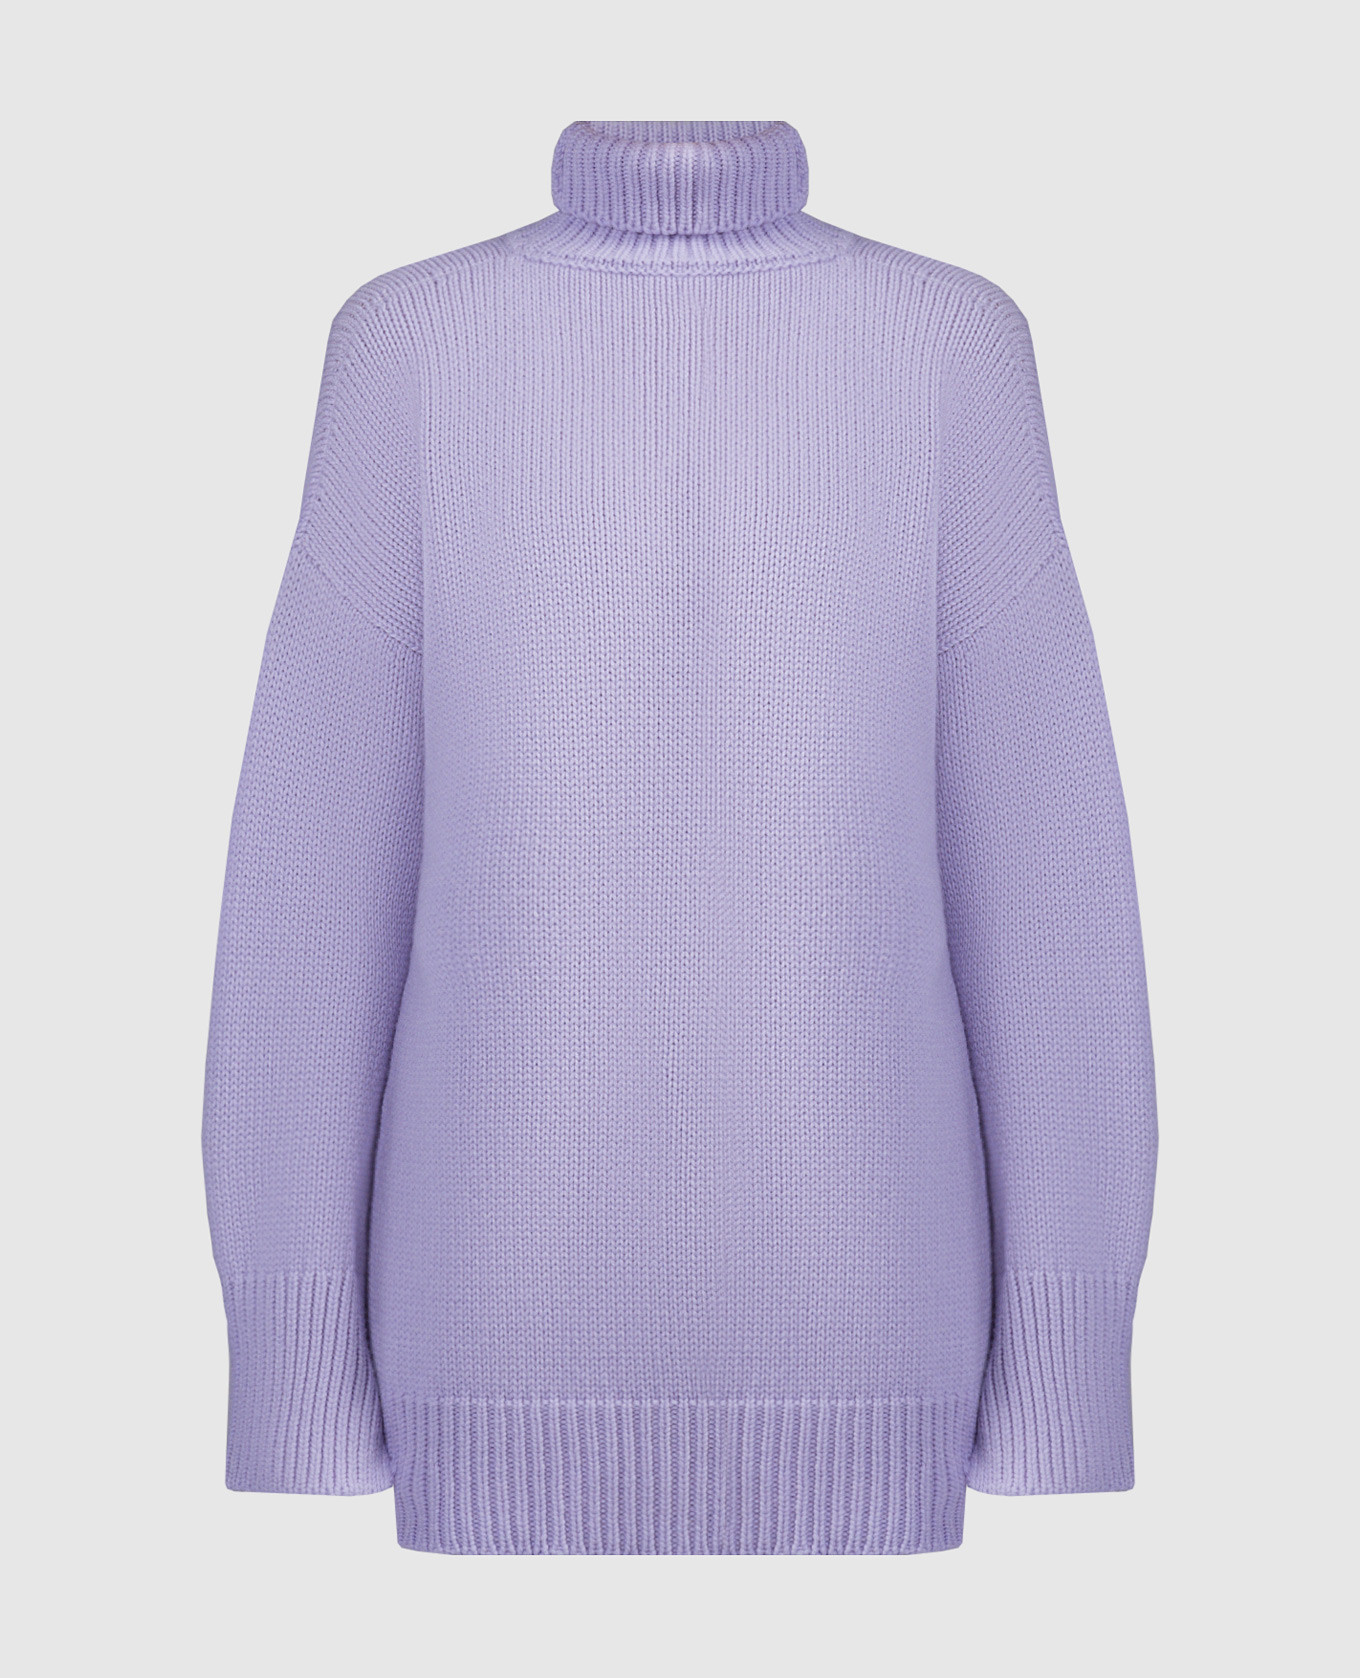 Purple wool and cashmere sweater